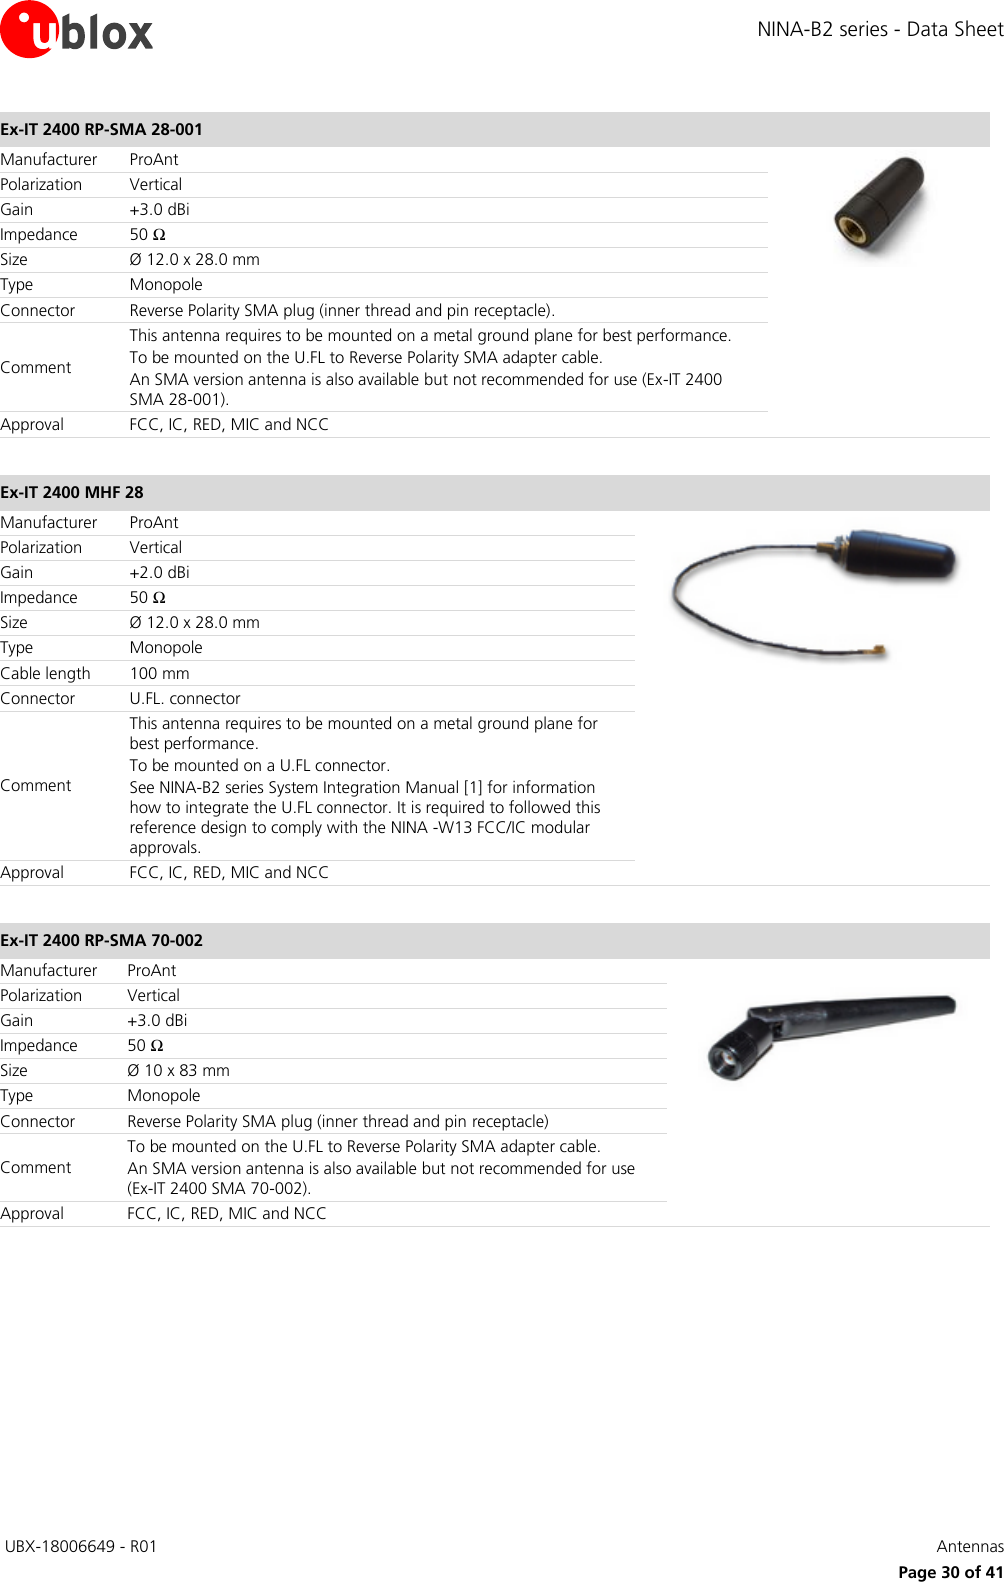 NINA-B2 series - Data Sheet  UBX-18006649 - R01   Antennas     Page 30 of 41 Ex-IT 2400 RP-SMA 28-001  Manufacturer ProAnt  Polarization Vertical Gain +3.0 dBi Impedance 50 Ω Size Ø 12.0 x 28.0 mm Type Monopole Connector Reverse Polarity SMA plug (inner thread and pin receptacle).  Comment This antenna requires to be mounted on a metal ground plane for best performance. To be mounted on the U.FL to Reverse Polarity SMA adapter cable. An SMA version antenna is also available but not recommended for use (Ex-IT 2400 SMA 28-001). Approval FCC, IC, RED, MIC and NCC  Ex-IT 2400 MHF 28  Manufacturer ProAnt  Polarization Vertical Gain +2.0 dBi Impedance 50 Ω Size Ø 12.0 x 28.0 mm Type Monopole Cable length 100 mm Connector U.FL. connector  Comment This antenna requires to be mounted on a metal ground plane for best performance. To be mounted on a U.FL connector.  See NINA-B2 series System Integration Manual [1] for information how to integrate the U.FL connector. It is required to followed this reference design to comply with the NINA -W13 FCC/IC modular approvals.  Approval FCC, IC, RED, MIC and NCC  Ex-IT 2400 RP-SMA 70-002  Manufacturer ProAnt  Polarization Vertical Gain +3.0 dBi Impedance 50 Ω Size Ø 10 x 83 mm Type Monopole Connector Reverse Polarity SMA plug (inner thread and pin receptacle) Comment To be mounted on the U.FL to Reverse Polarity SMA adapter cable. An SMA version antenna is also available but not recommended for use (Ex-IT 2400 SMA 70-002). Approval FCC, IC, RED, MIC and NCC  